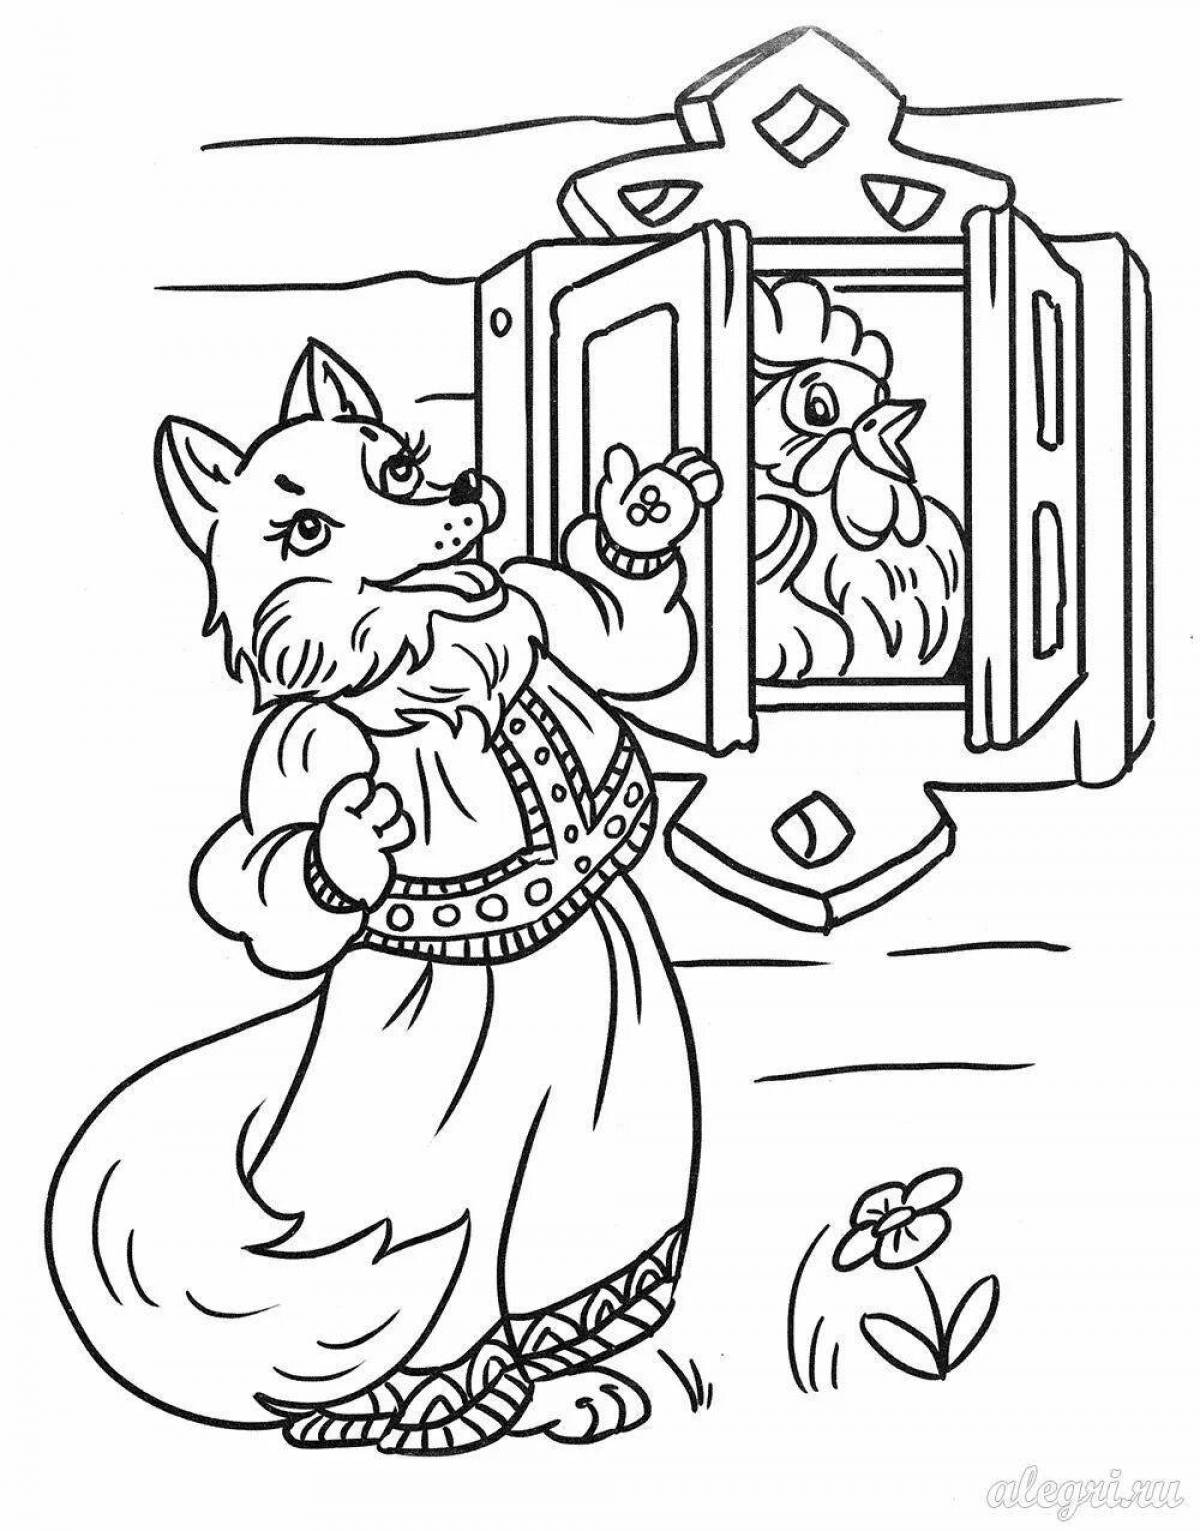 Delightful coloring pages heroes of fairy tales